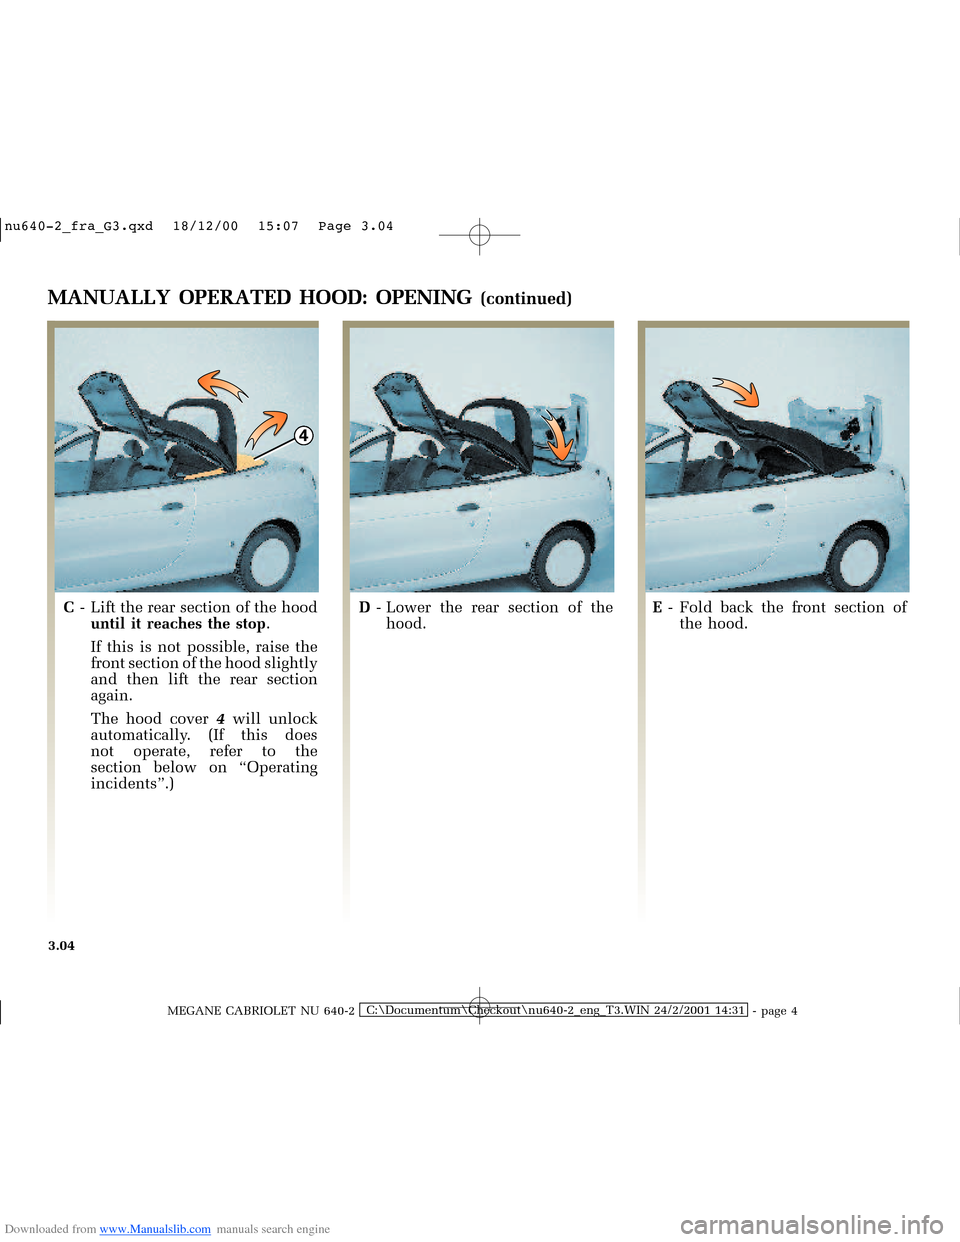 RENAULT MEGANE 2000 X64 / 1.G Manual Online Downloaded from www.Manualslib.com manuals search engine 4
�Q�X������B�I�U�D�B�*���T�[�G� � ��������� � ������ � �3�D�J�H� ����
MEGANE CABRIOLET NU 640-2C:\Documentum\Ch